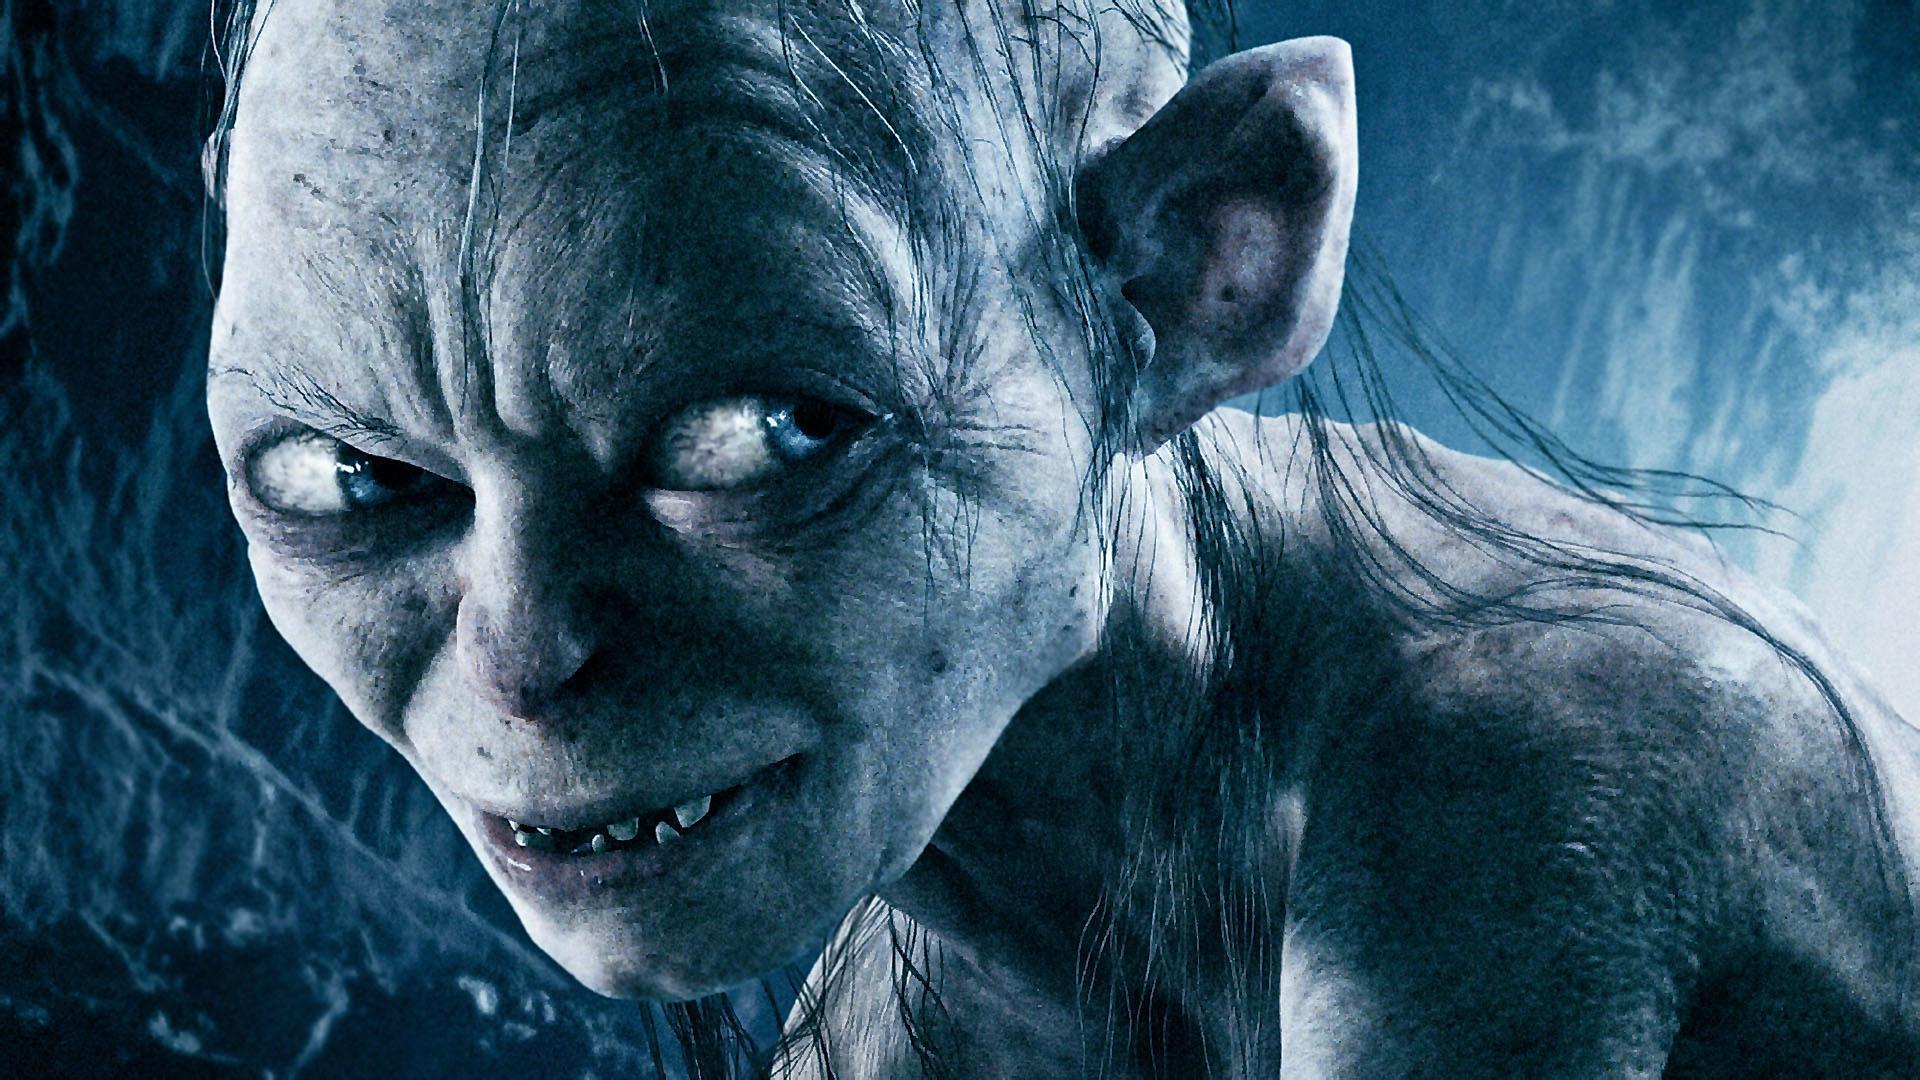 Lord of The Rings Gollum With Ring HD Wallpaper, Background Image